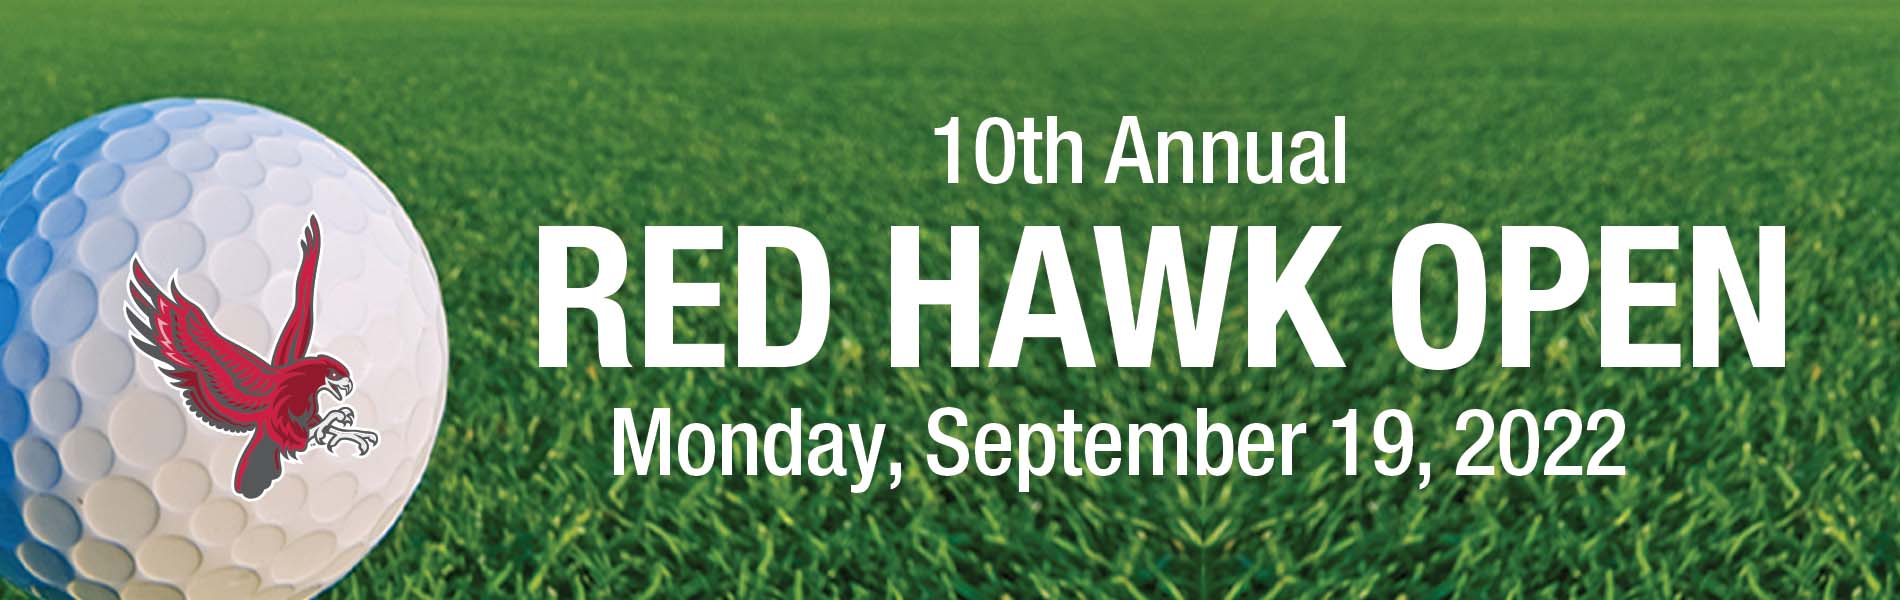 9th Annual Red Hawk Open - Monday, September 13, 2021